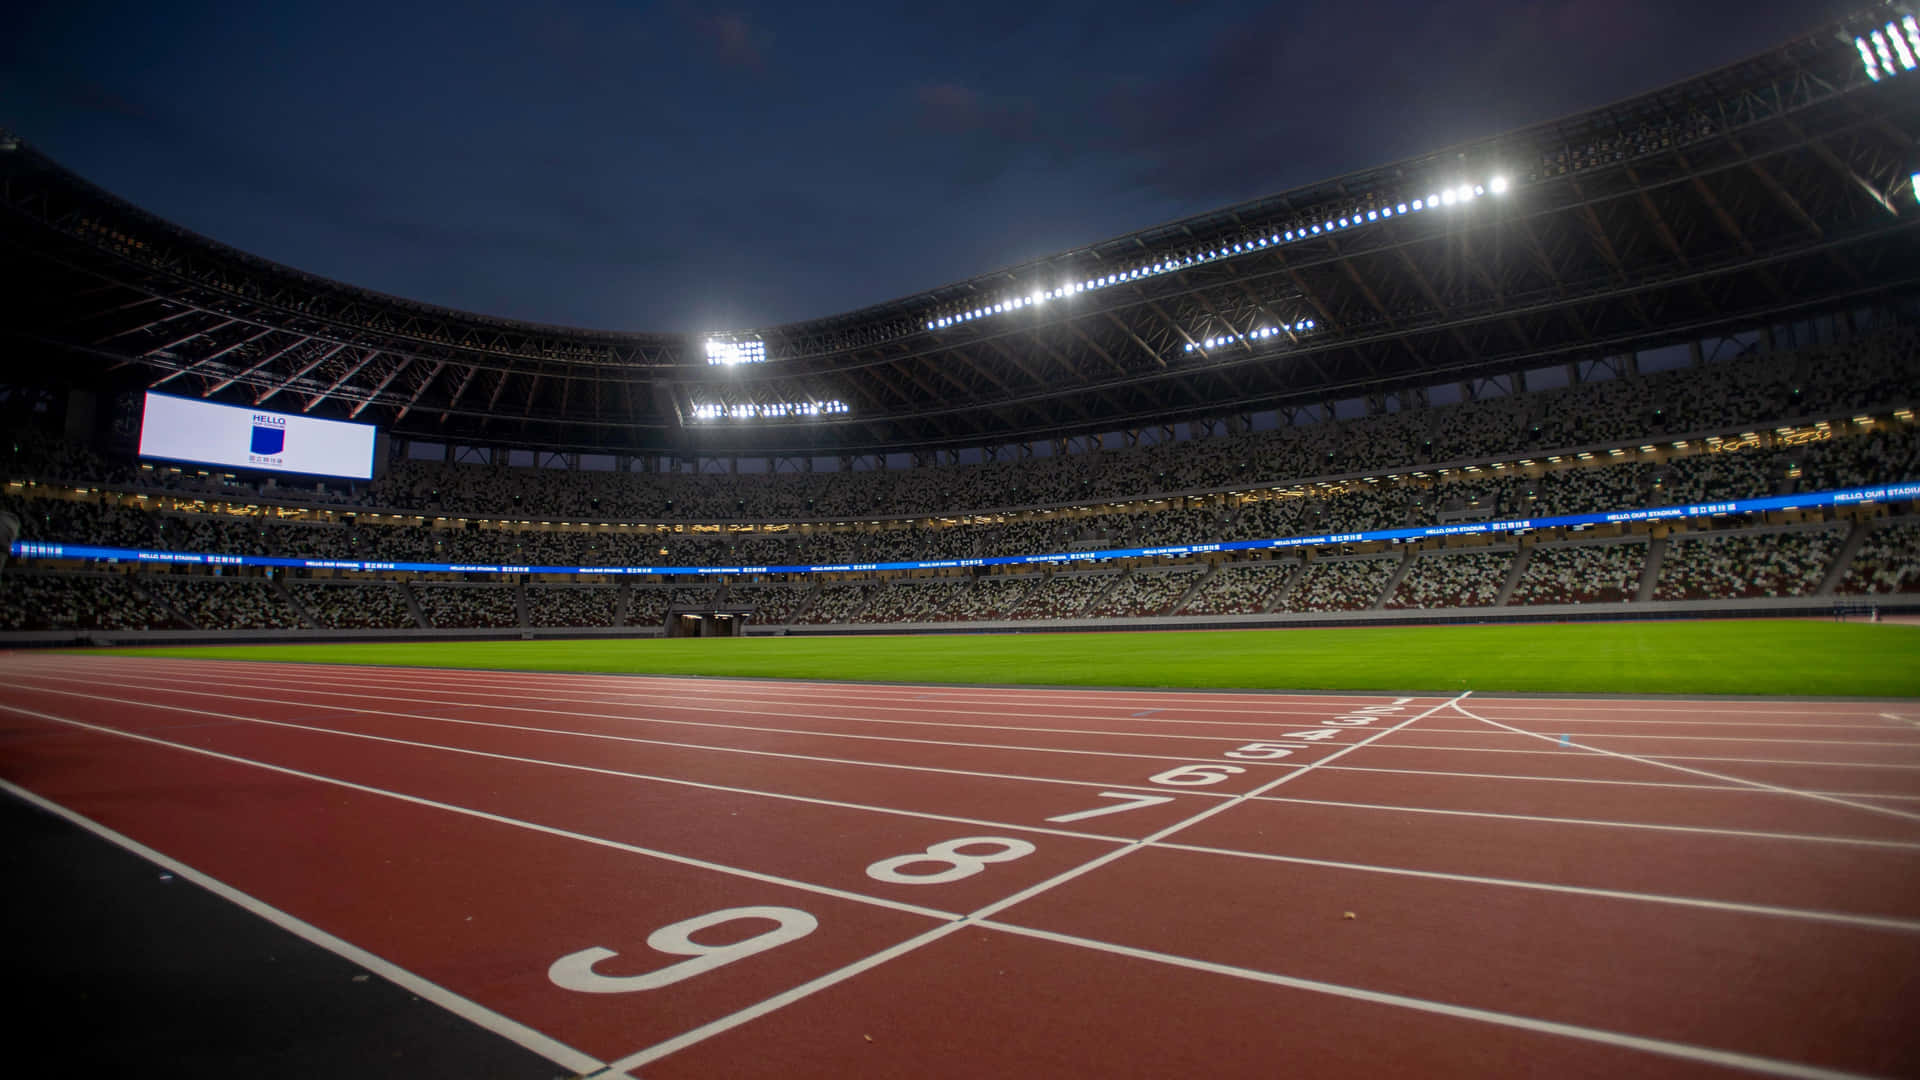 A Stadium With A Track And Lights